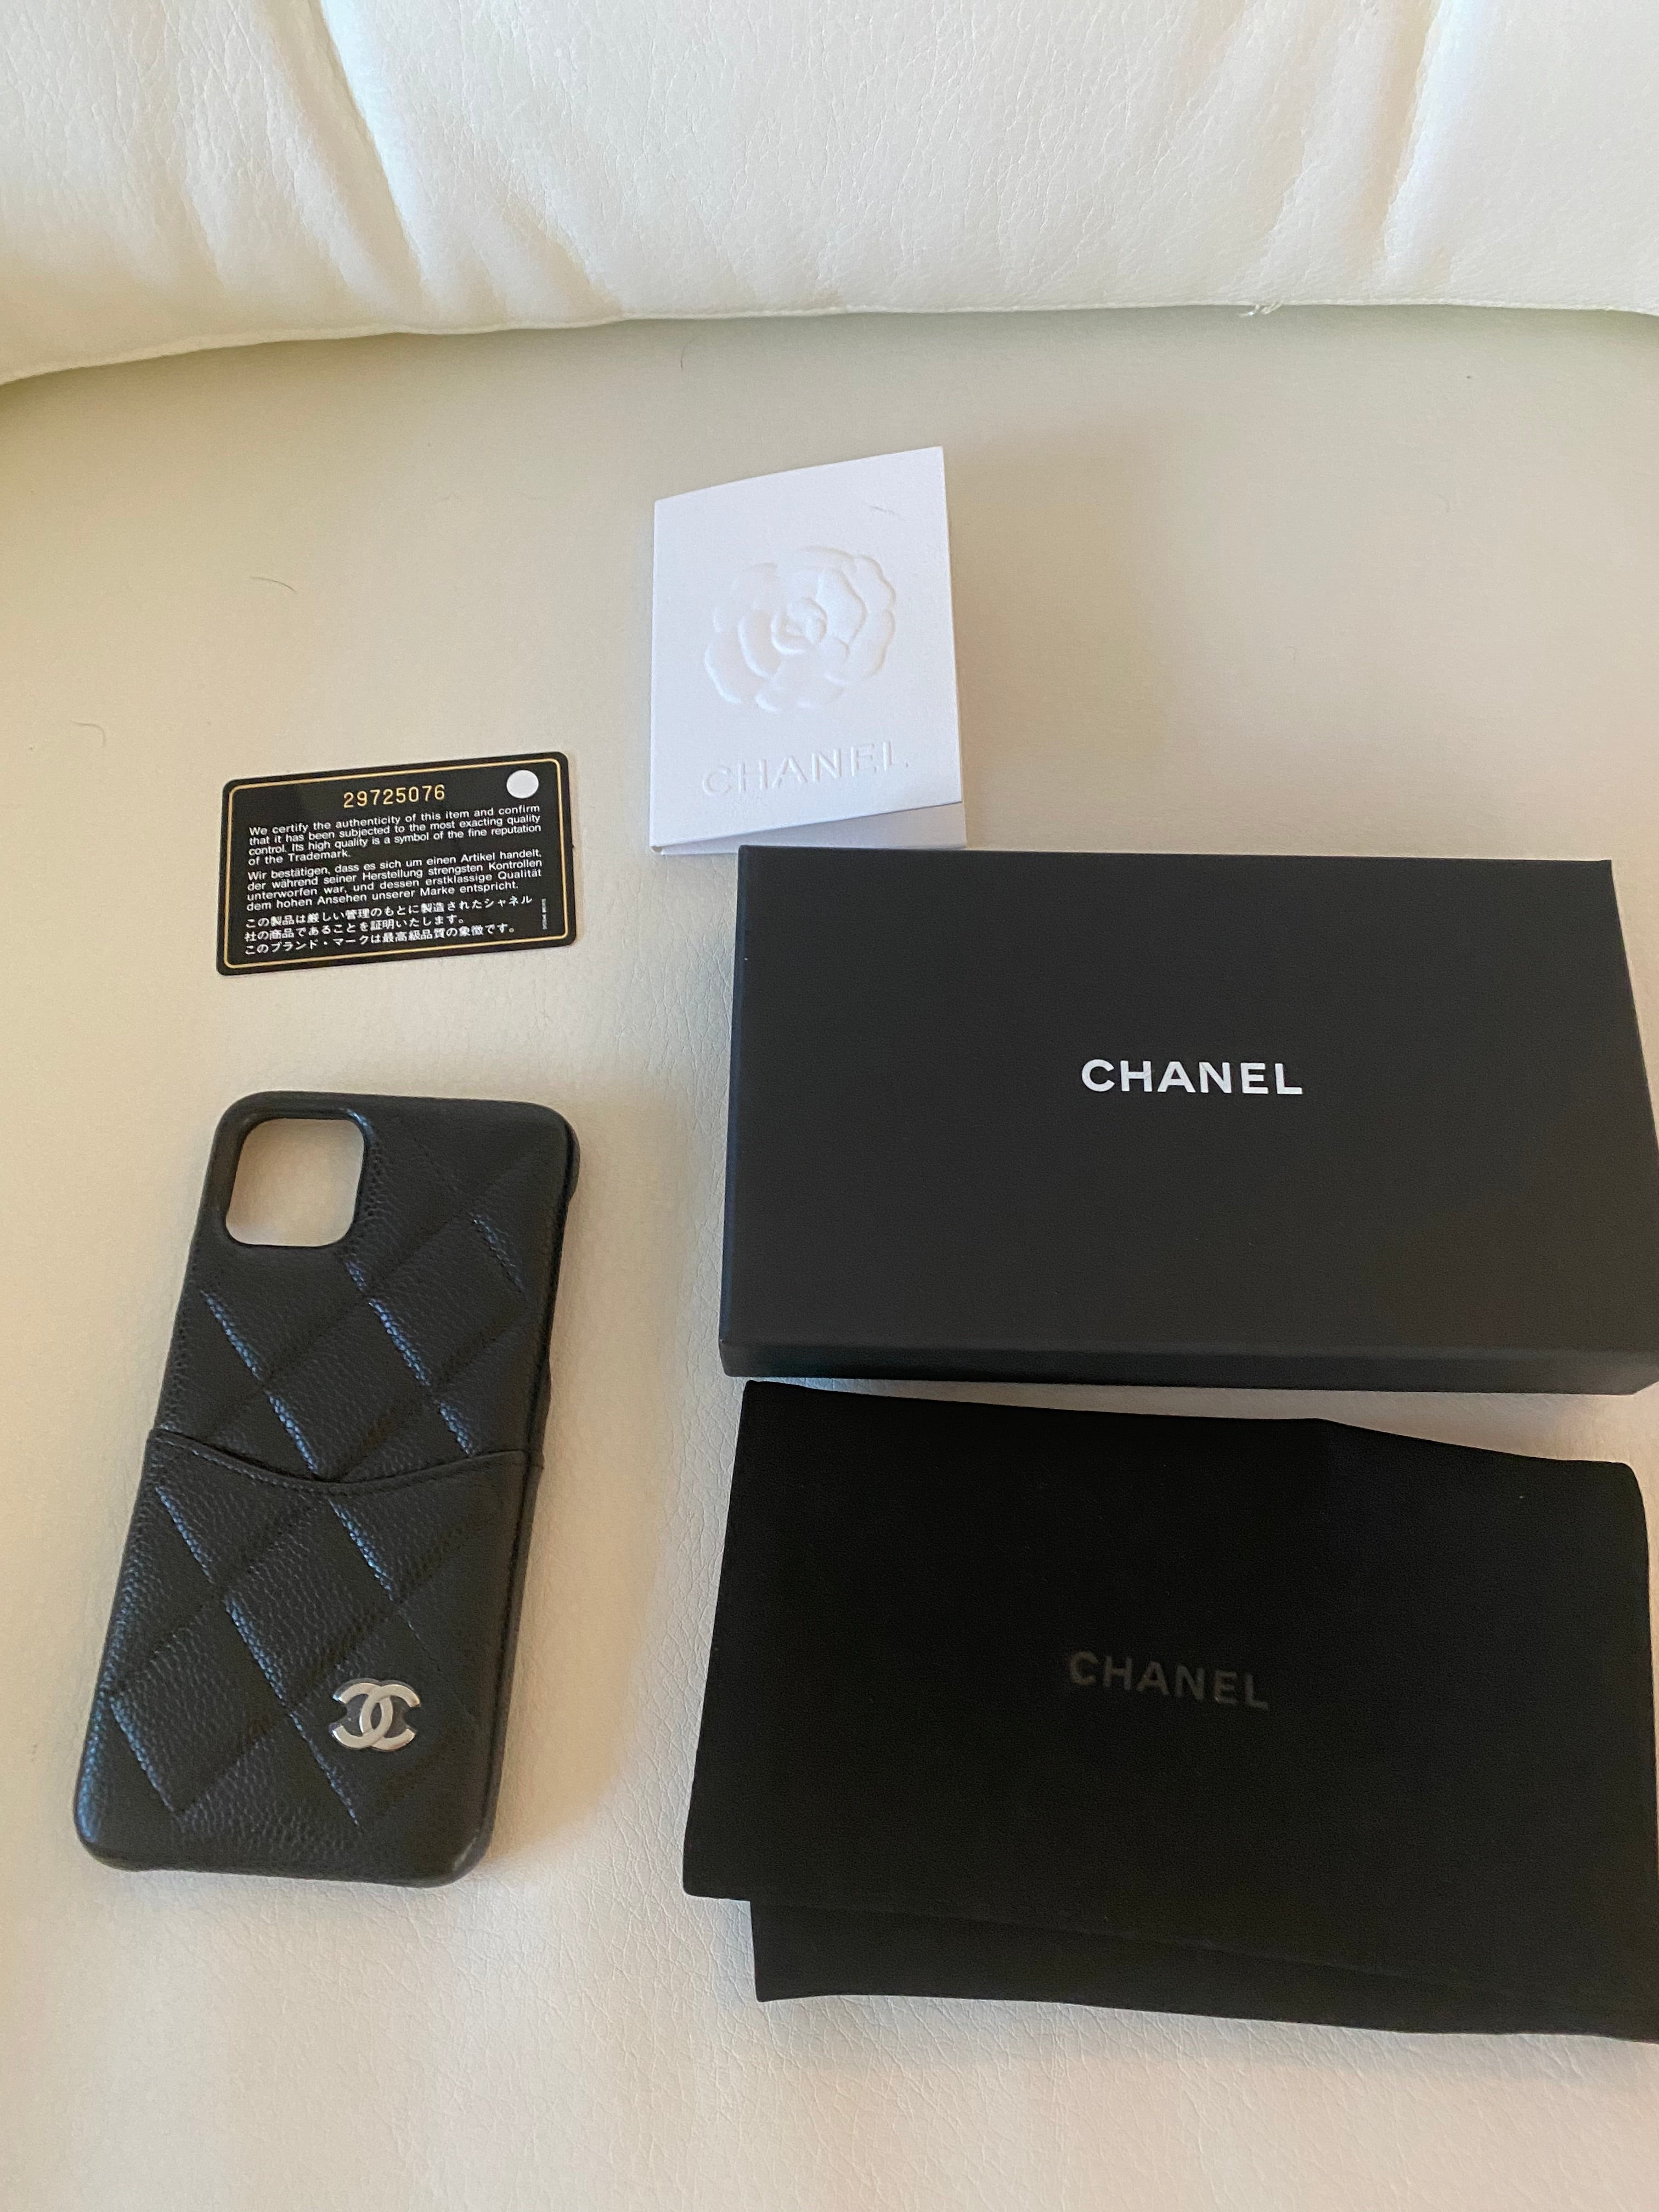 Chanel case IPhone 11 Pro Max – Beccas Bags